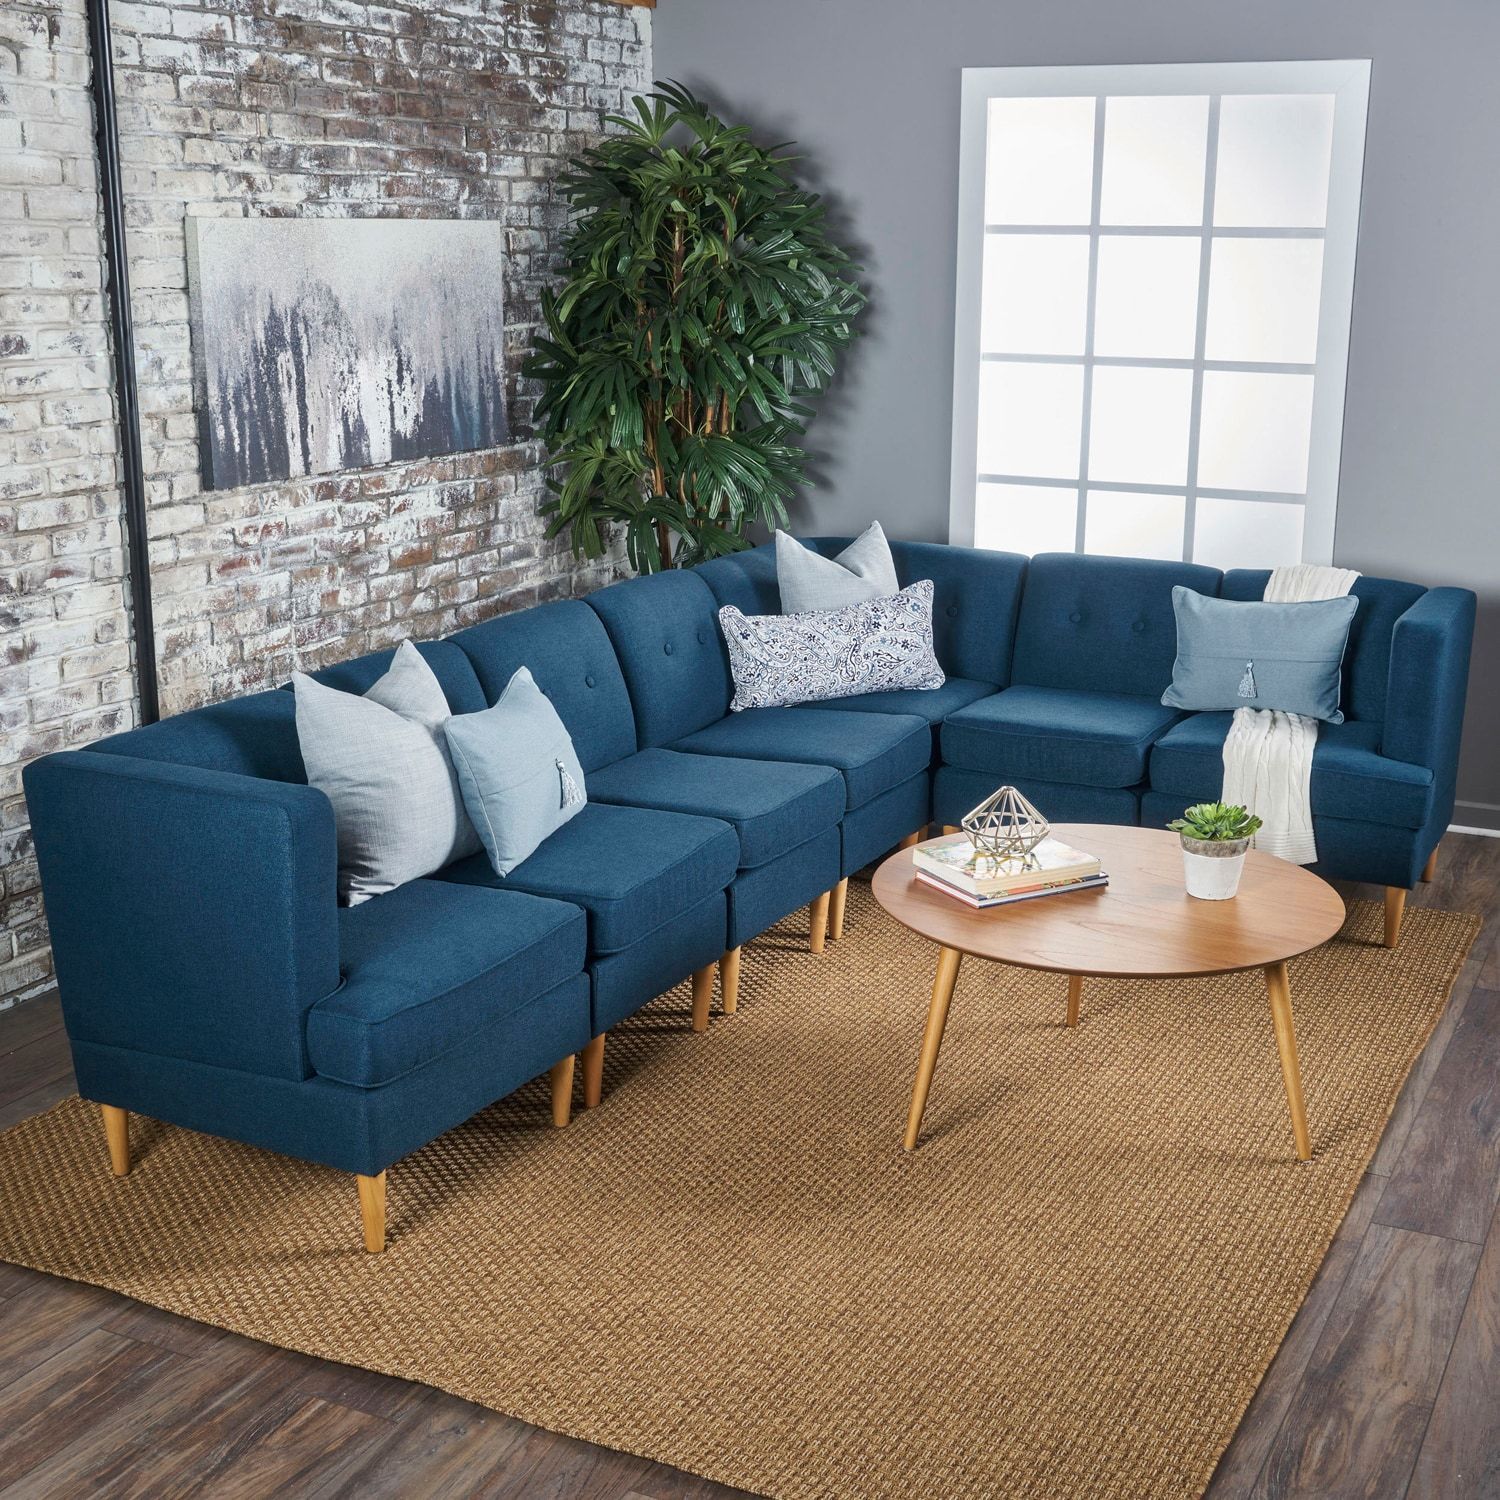 Large Navy Milton Sectional Sofa Set | Blue Living Room Decor, Sofa Set With Regard To Navy Linen Coil Sofas (View 17 of 20)